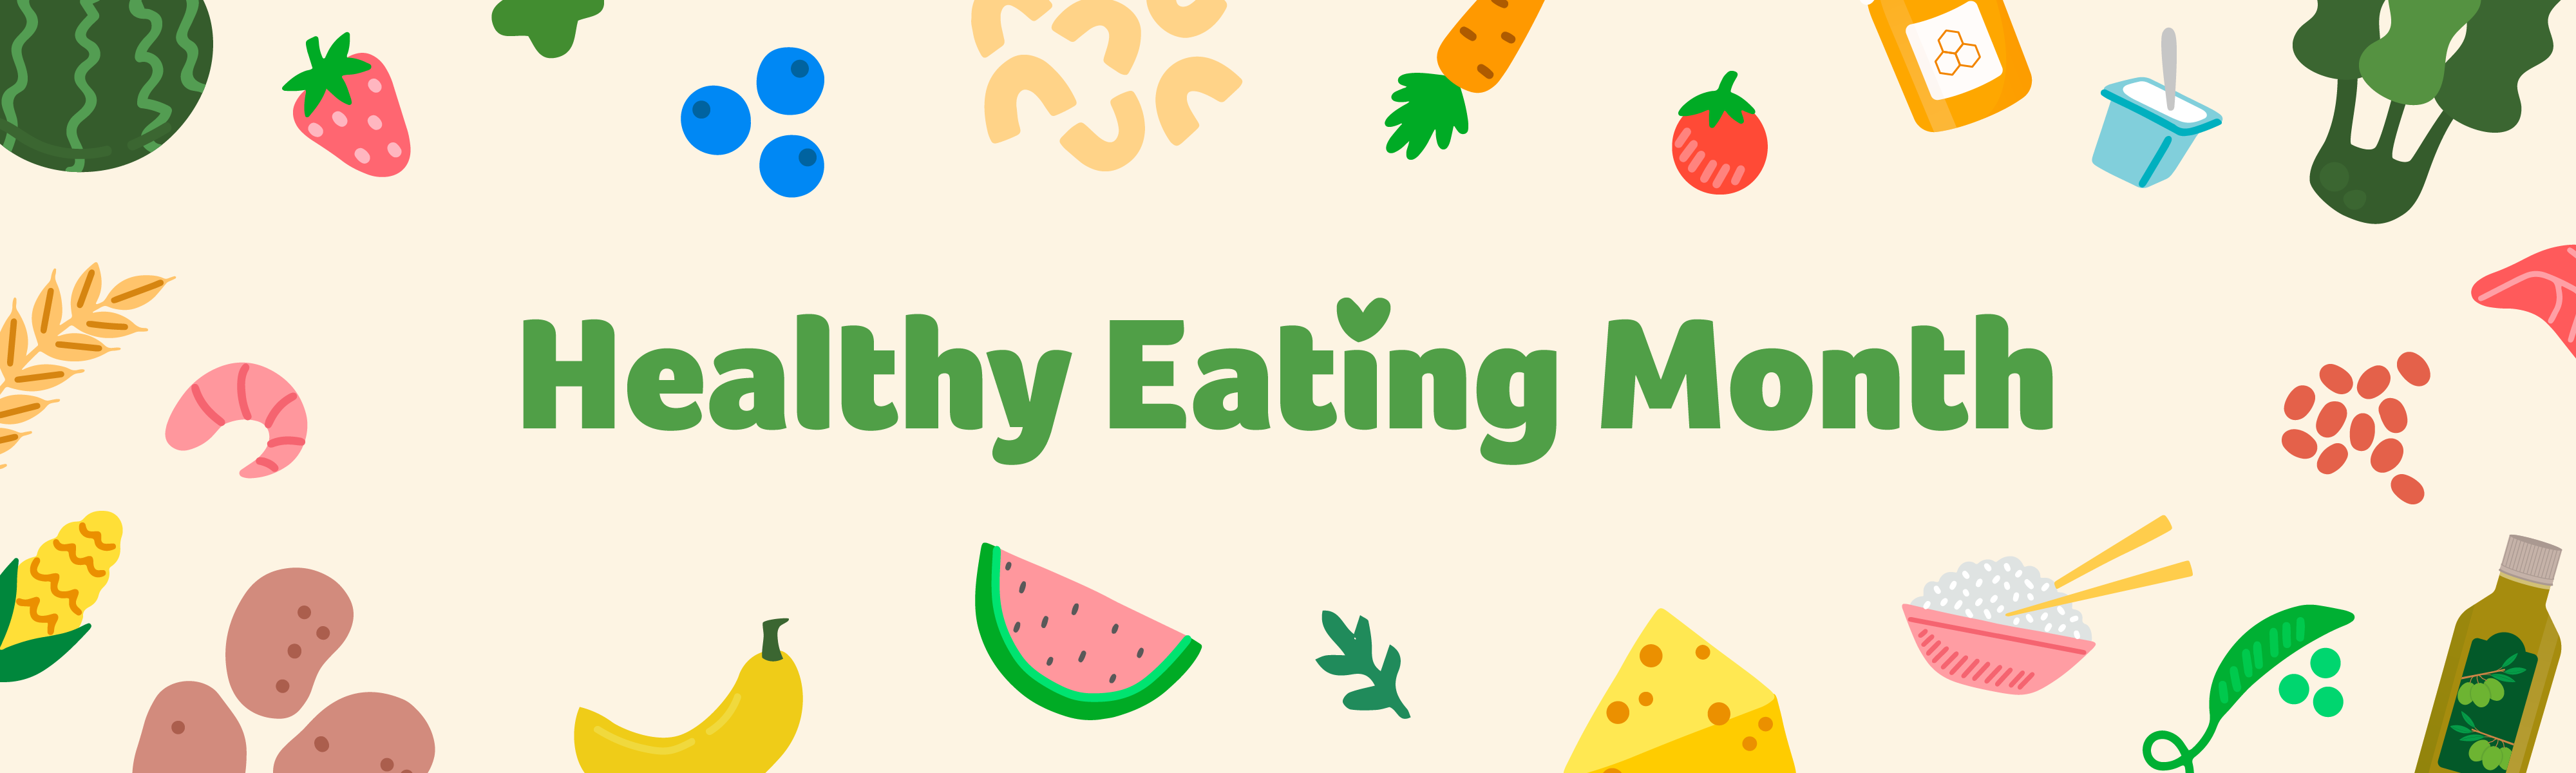 Healthy Eating Month